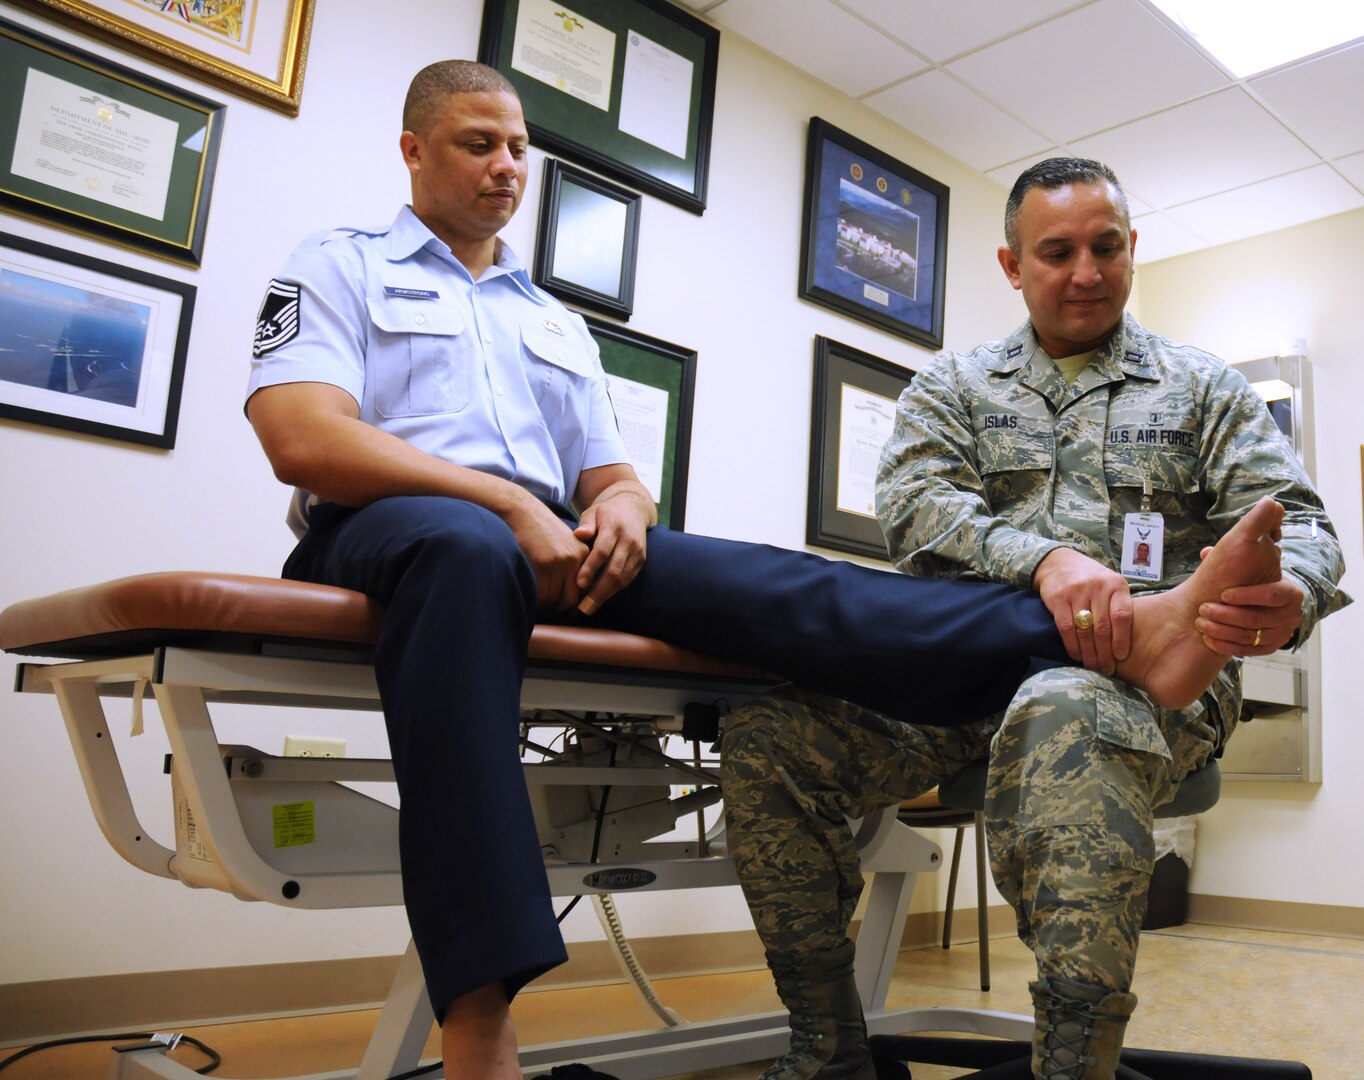 Senior Master Sgt. Travis Armstrong (left), Air Force Personnel Center, receives treatment from Capt. Felix Islas, 359th Medical Group Physical Therapy Flight commander, July 15 at the Joint Base San Antonio-Randolph medical clinic. The purpose of physical therapy is to rehabilitate a patient’s body to full functioning capacity. (U.S. Air Force photo by Airman 1st Class Alexandria Slade)